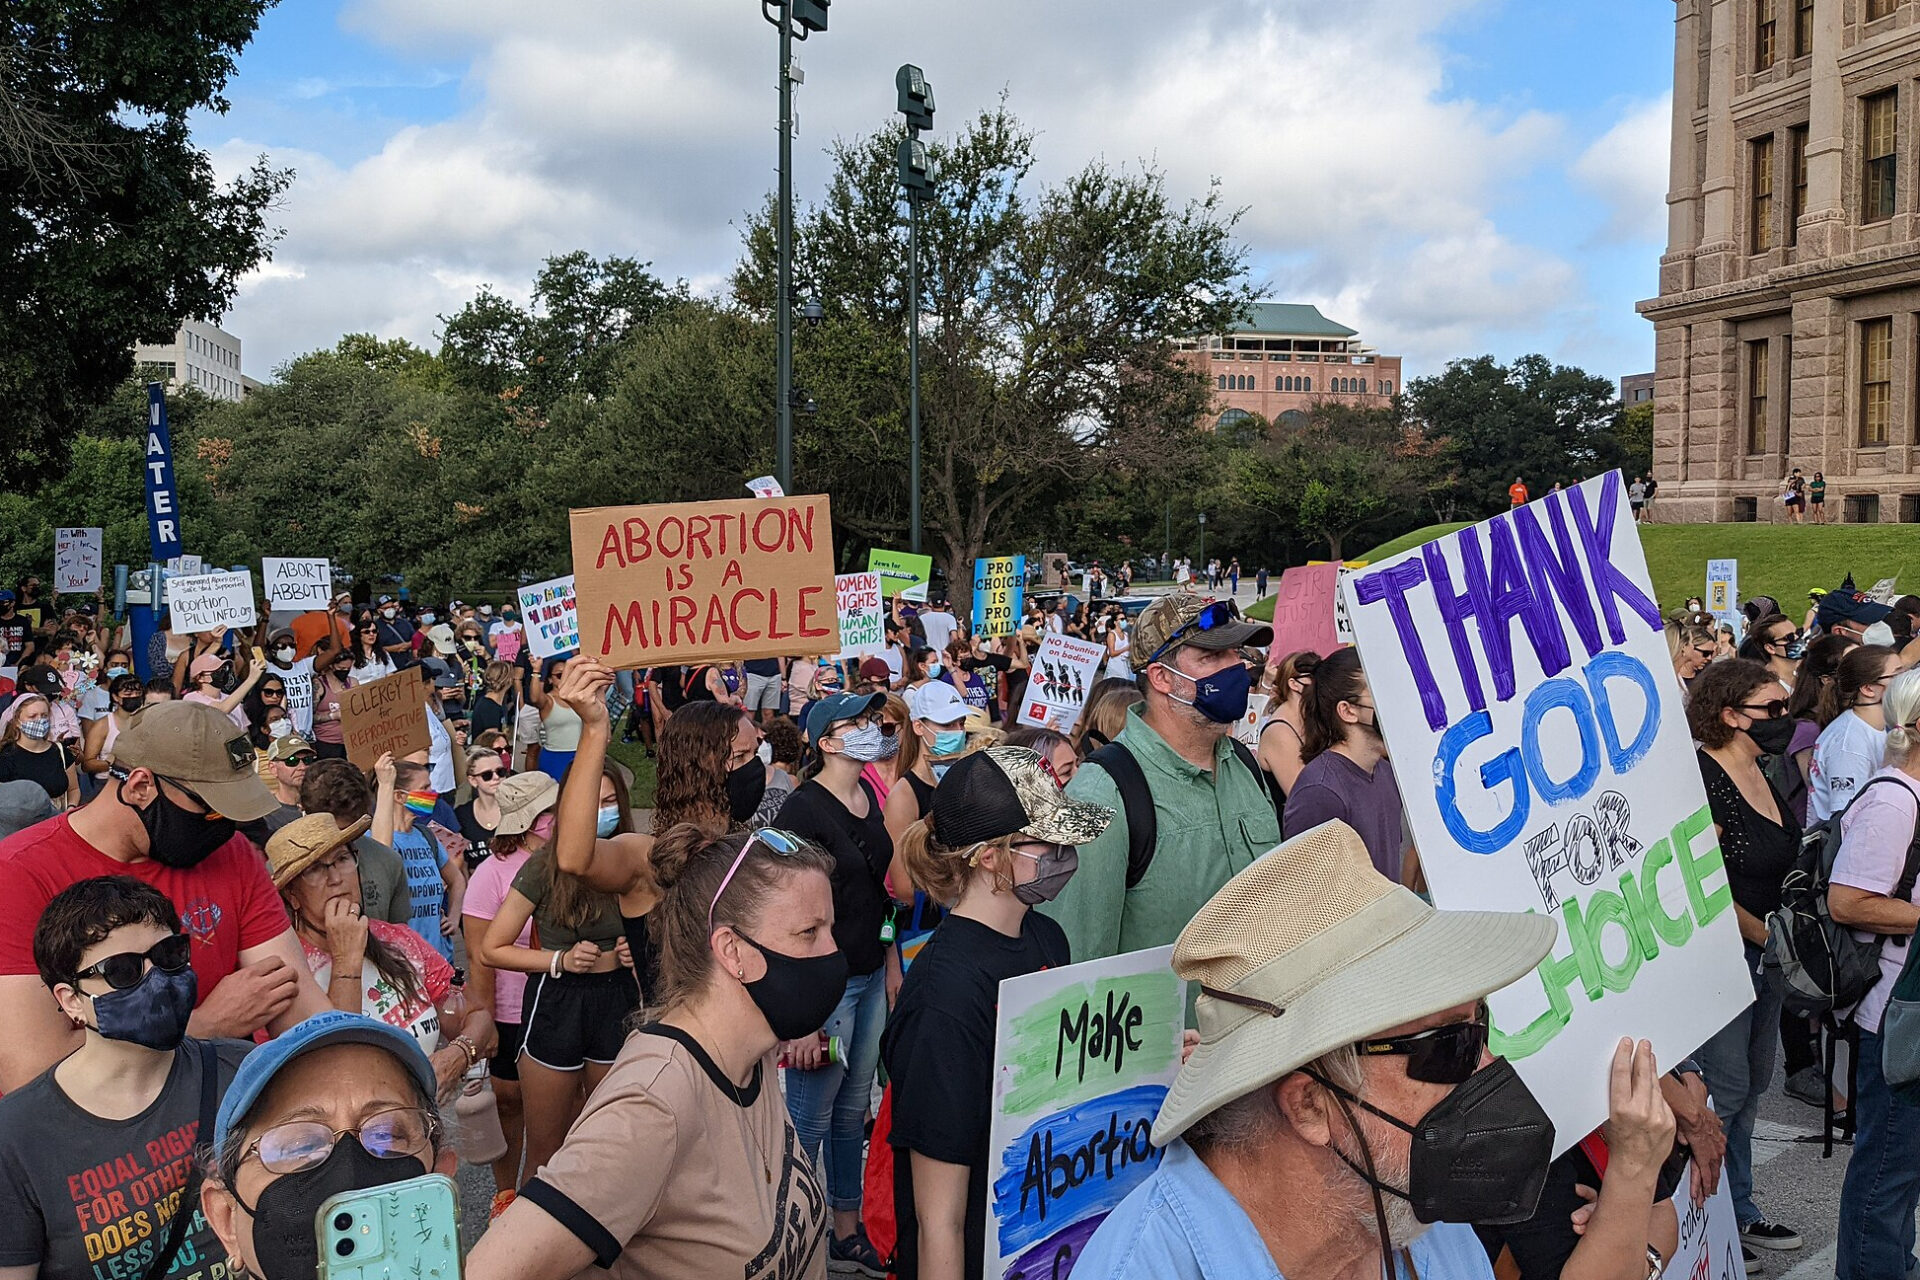 Crowd at a rally against SB 8 at the Texas Capitol, with a sign reading "abortion is a miracle" in October 2021 (Jno.Skinner via Wikimedia Commons)